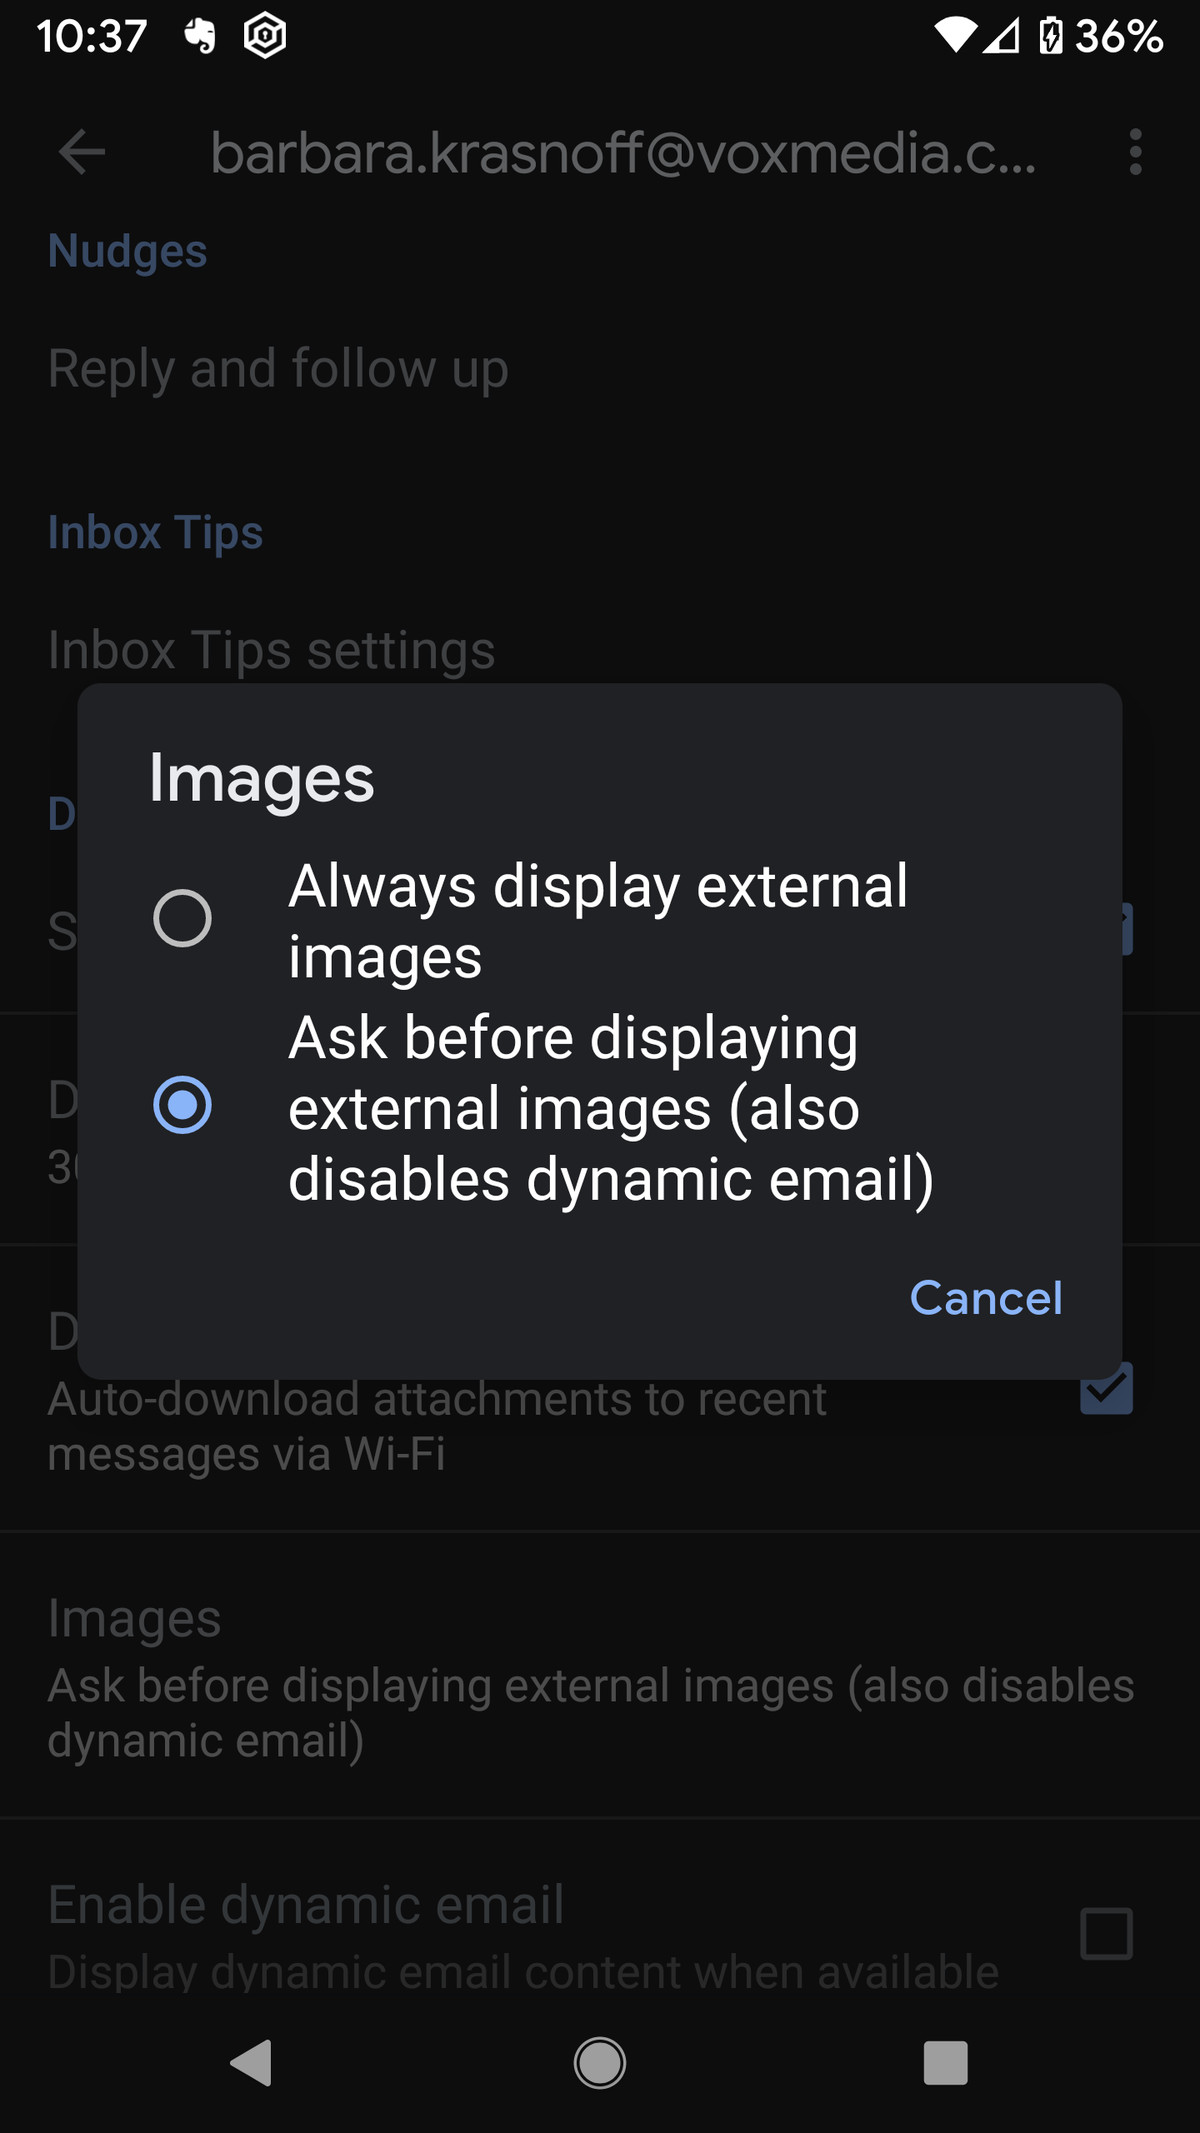 You can now disable the autoloading of images.